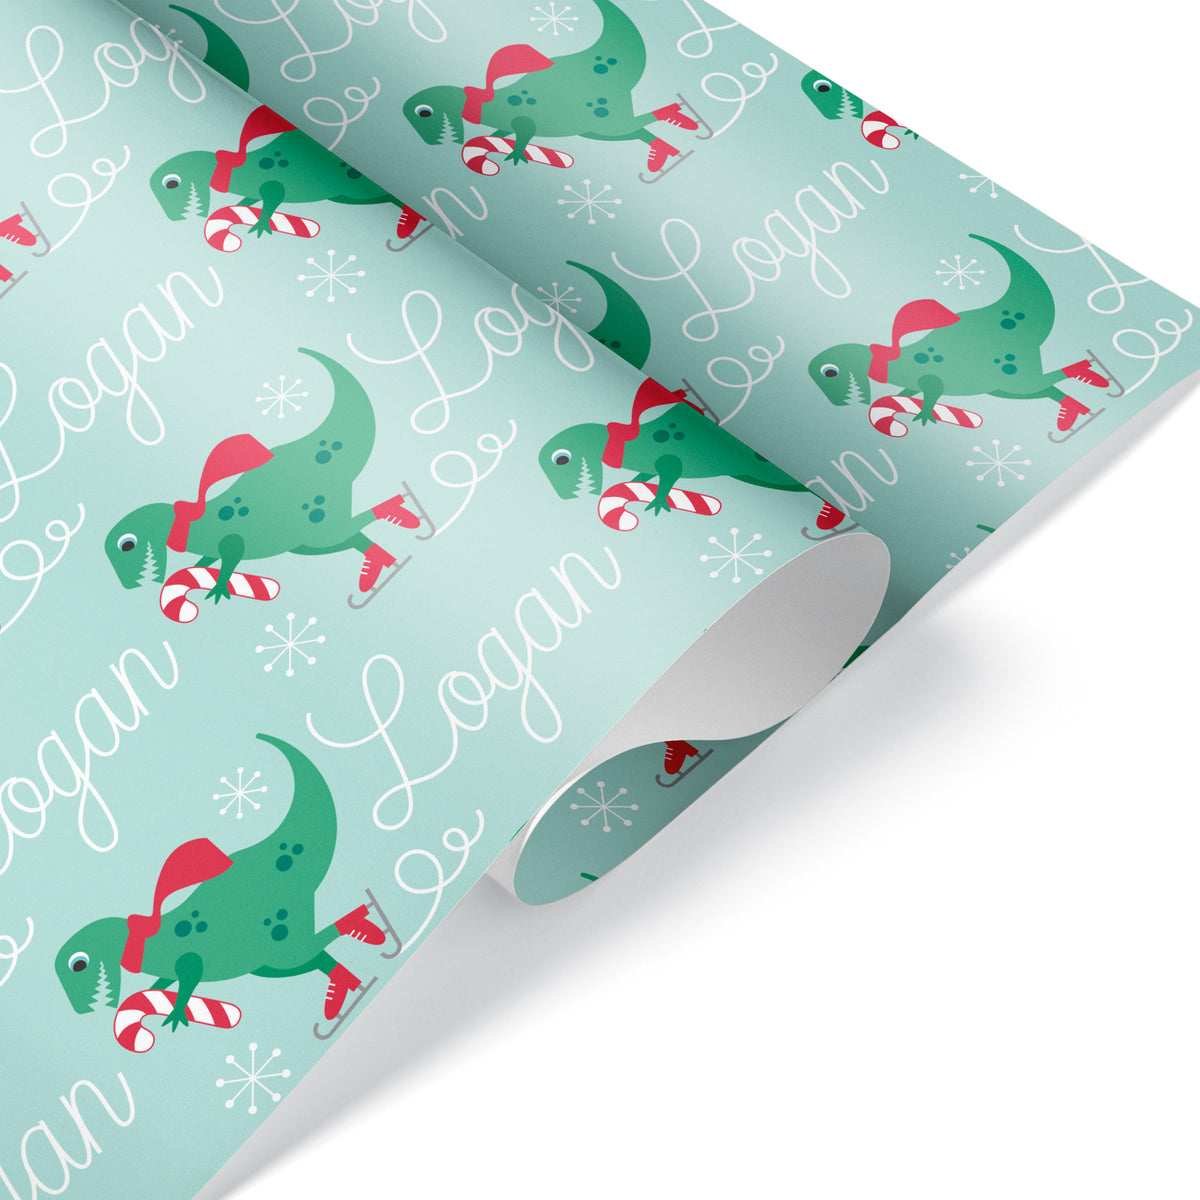 T-Rex Ice Skating Christmas Personalized Wrapping Paper - VINTAGE